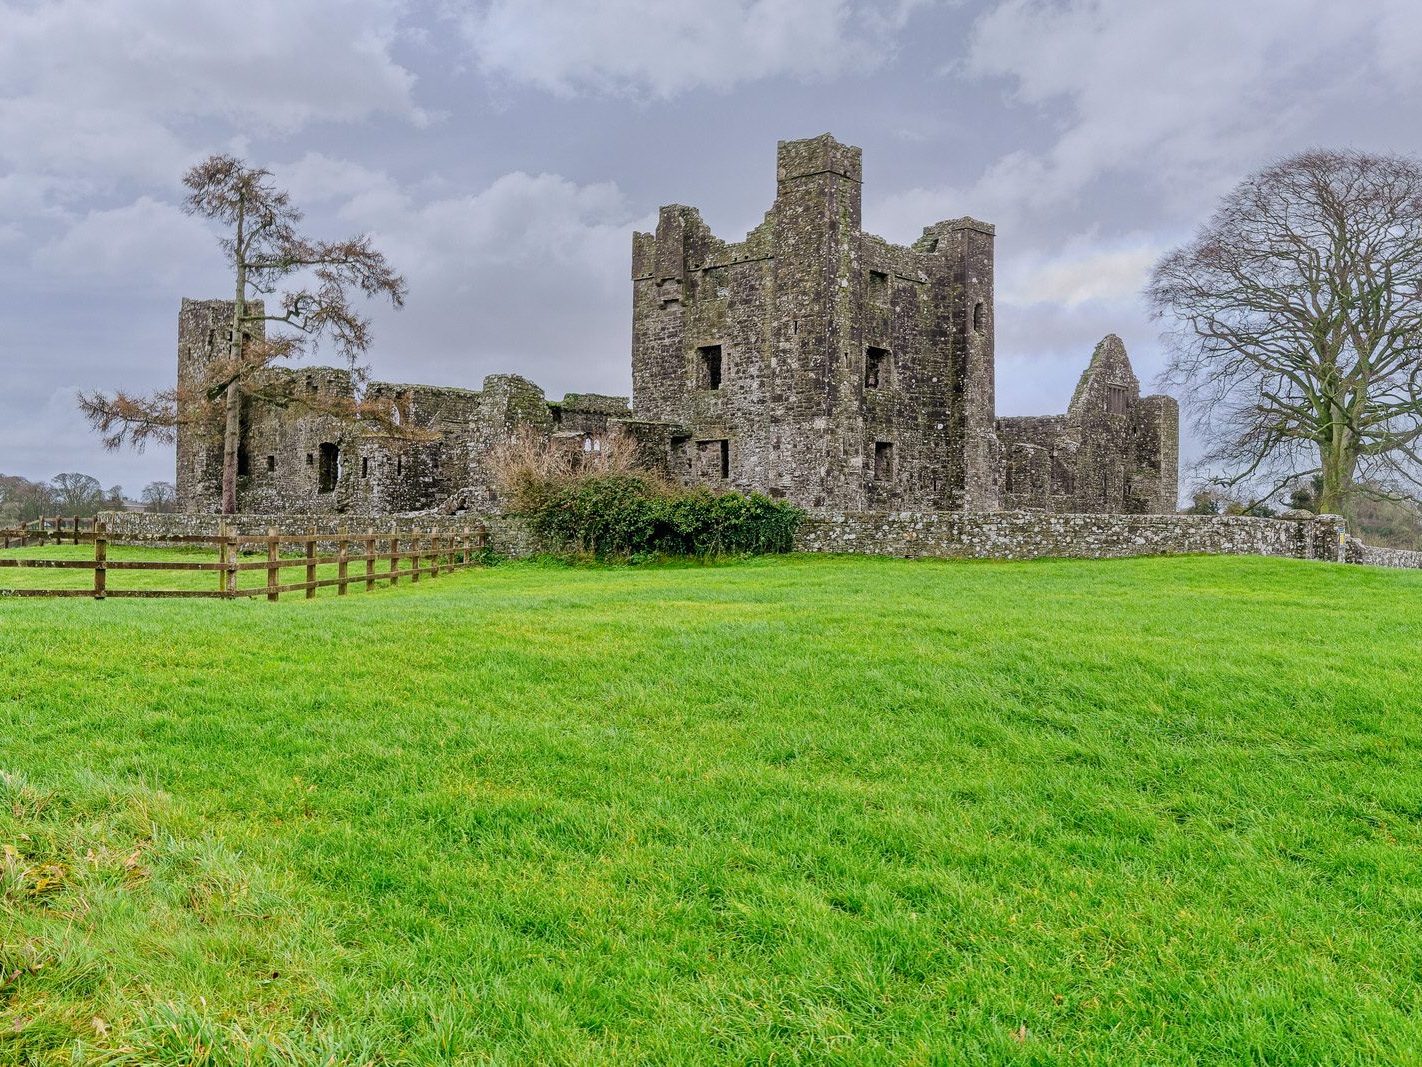 BECTIVE ABBEY WHICH I VISITED LAST CHRISTMAS [THERE WERE NO OTHER VISITORS AS IT WAS A VERY WET DAY]--225207-1